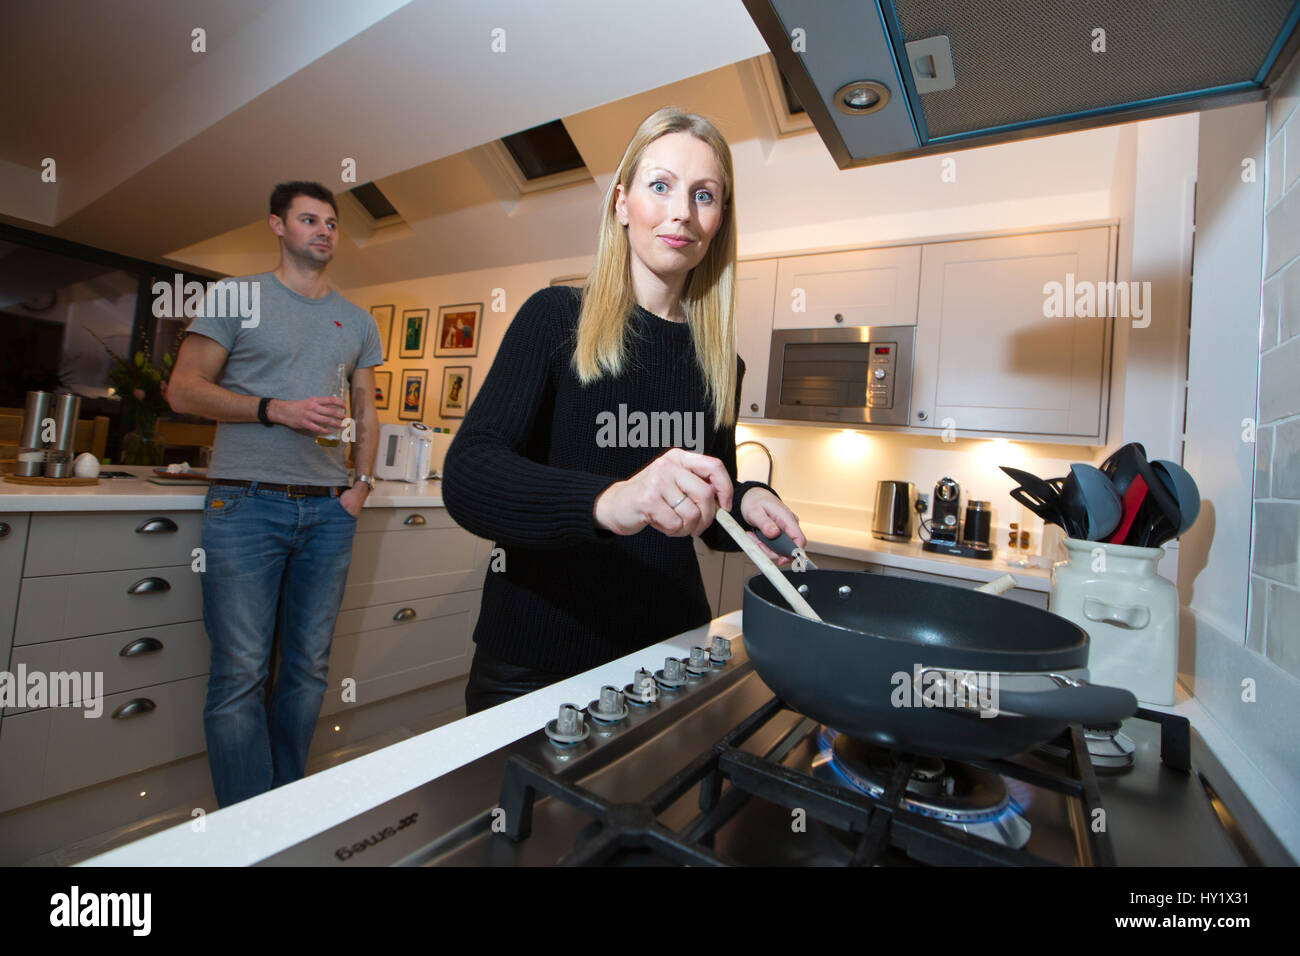 British family using gas utility at home Stock Photo